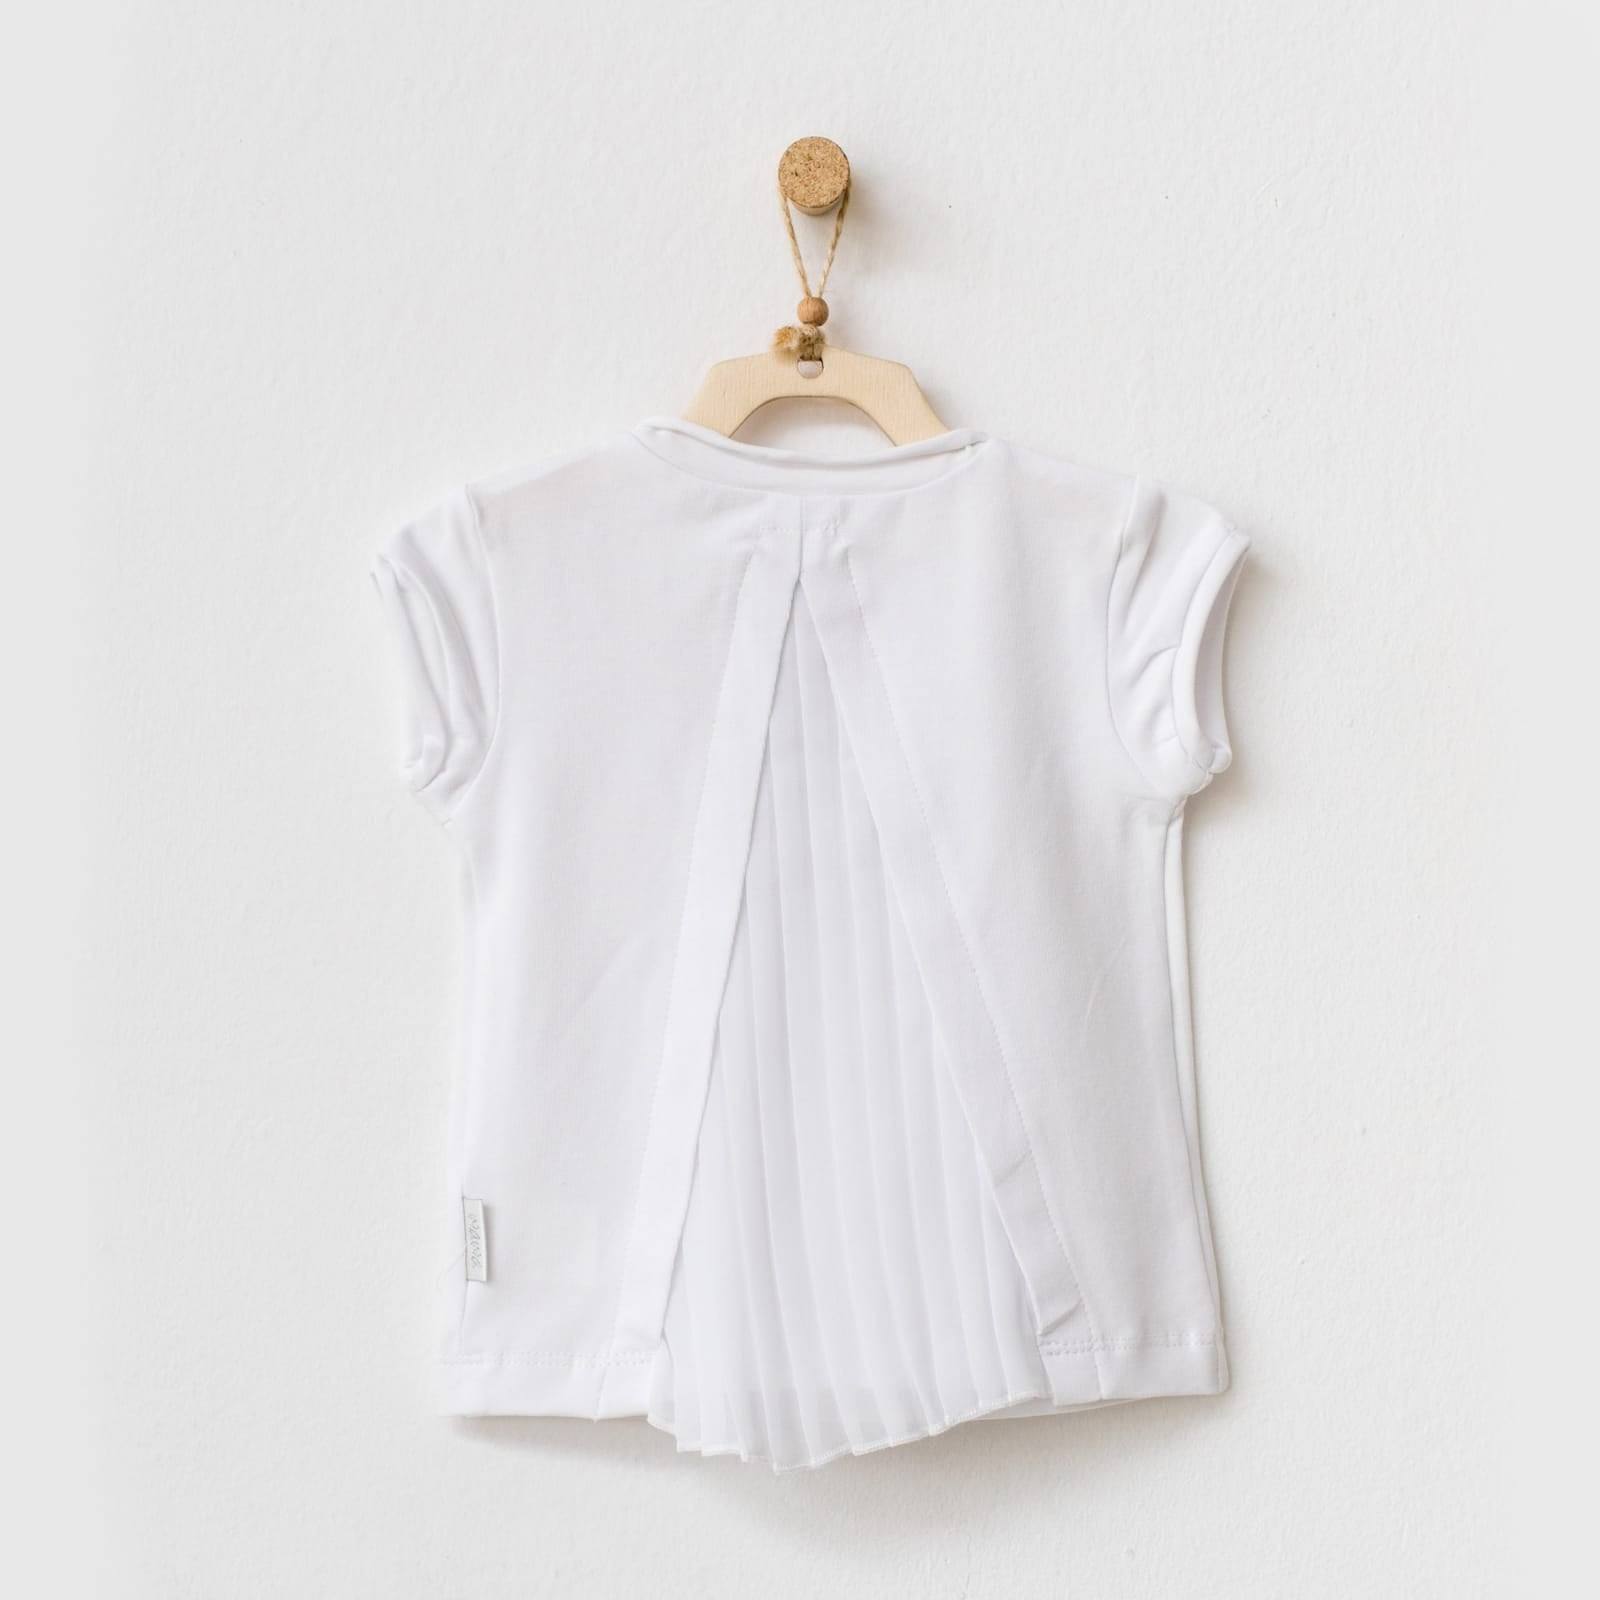 White Short Sleeve T-shirt for baby girls 0 to 2 yrs - White Short Sleeve T-shirt for baby girls 0 to 2 yrs - 1-3 Months / White - Andywawa - Melymod